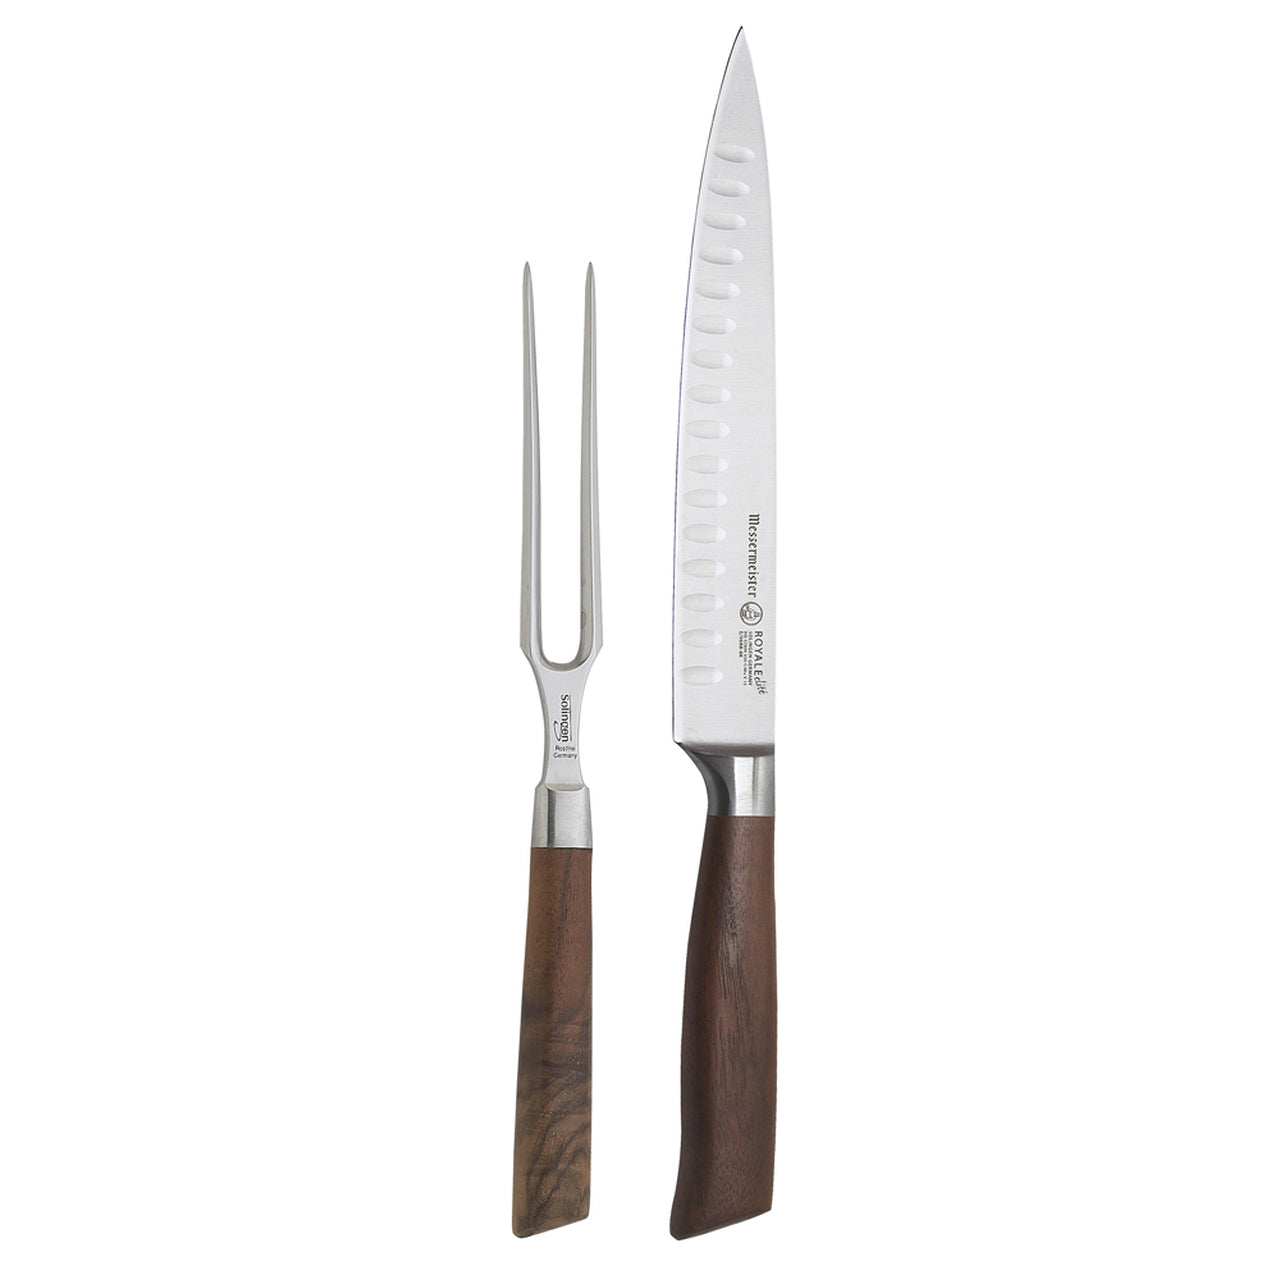 BEON.COM.AU E9000 2KS         Royal Elite 2 Piece Kullenschliff Carving Set The Messermeister Royale Elité Carving Set consists of an 8 Inch Kullenschliff Carving Knife (E9688 8K) and a 6 Inch Straight Carving Fork (E9805 6). This is the perfect addition to your cutlery collection. Impress your guests by car... Messermeister at BEON.COM.AU